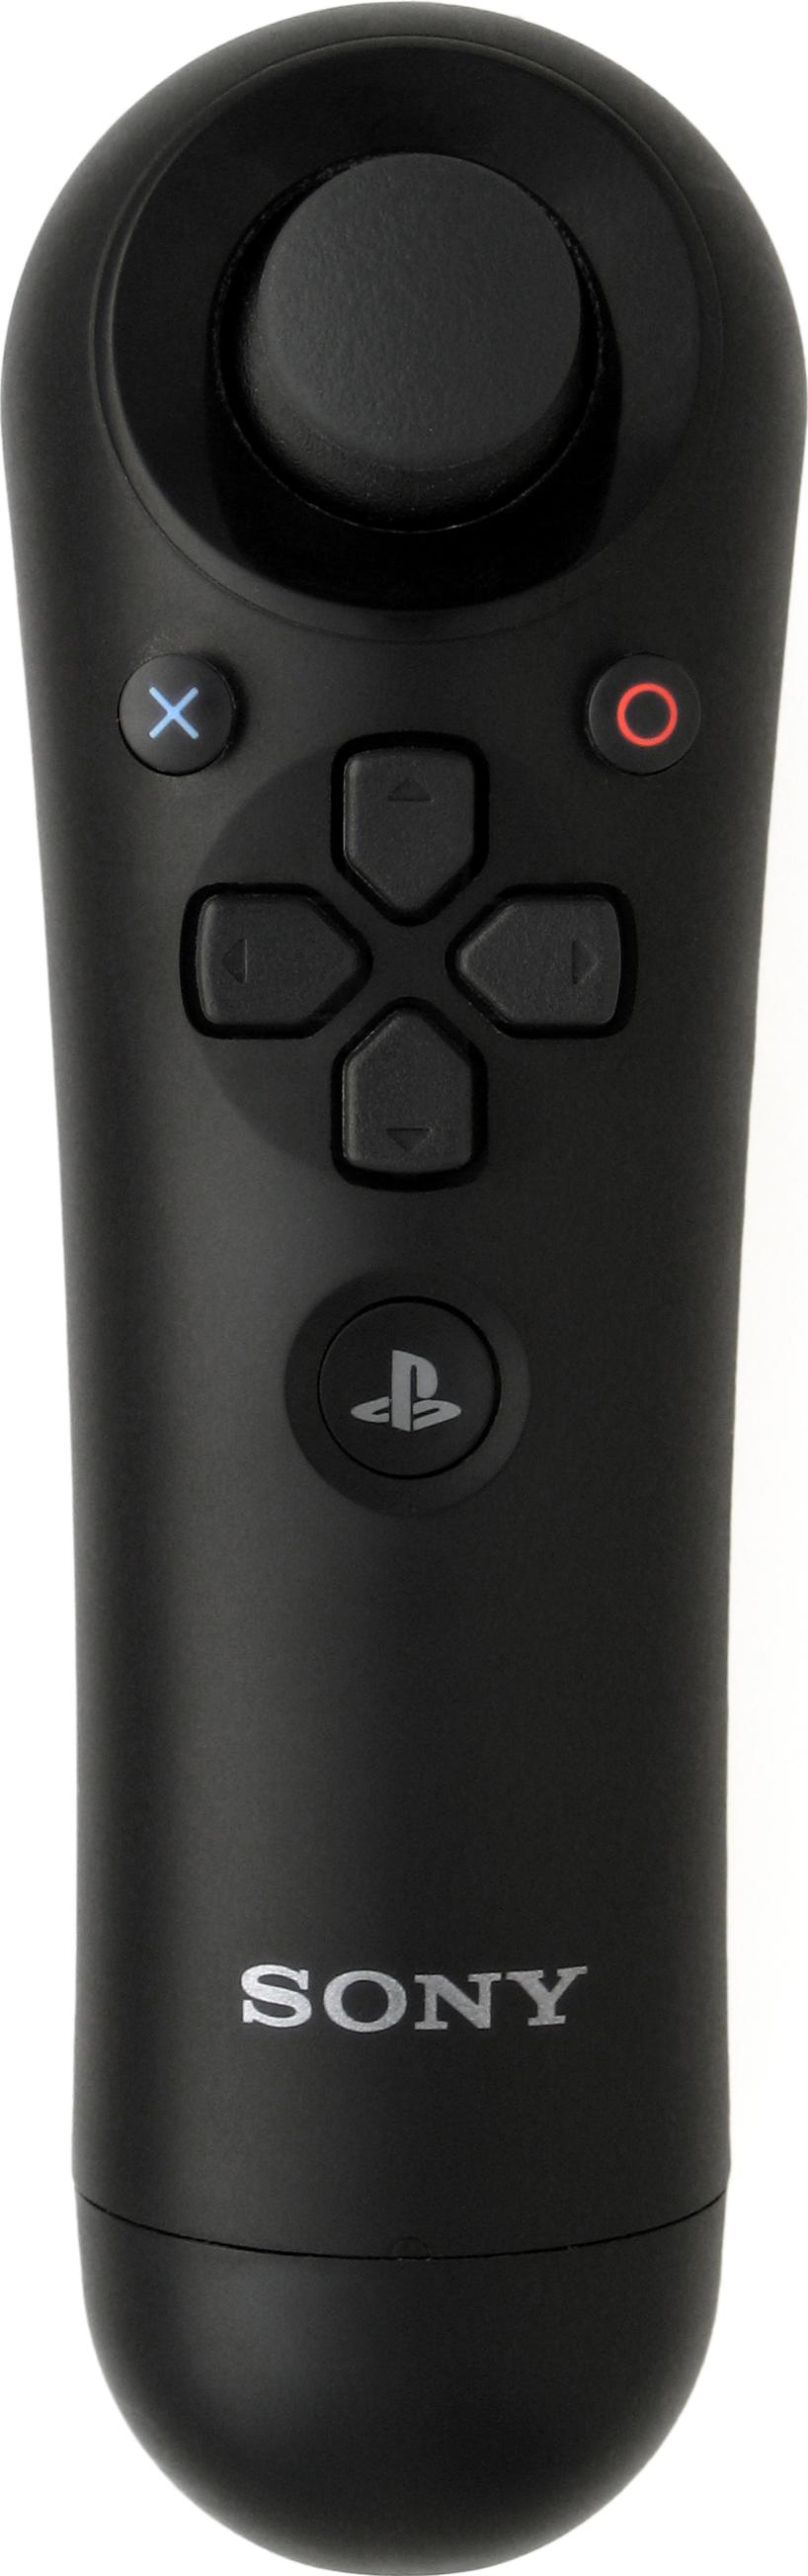 Playstation Move navigation controller Actual Size Image